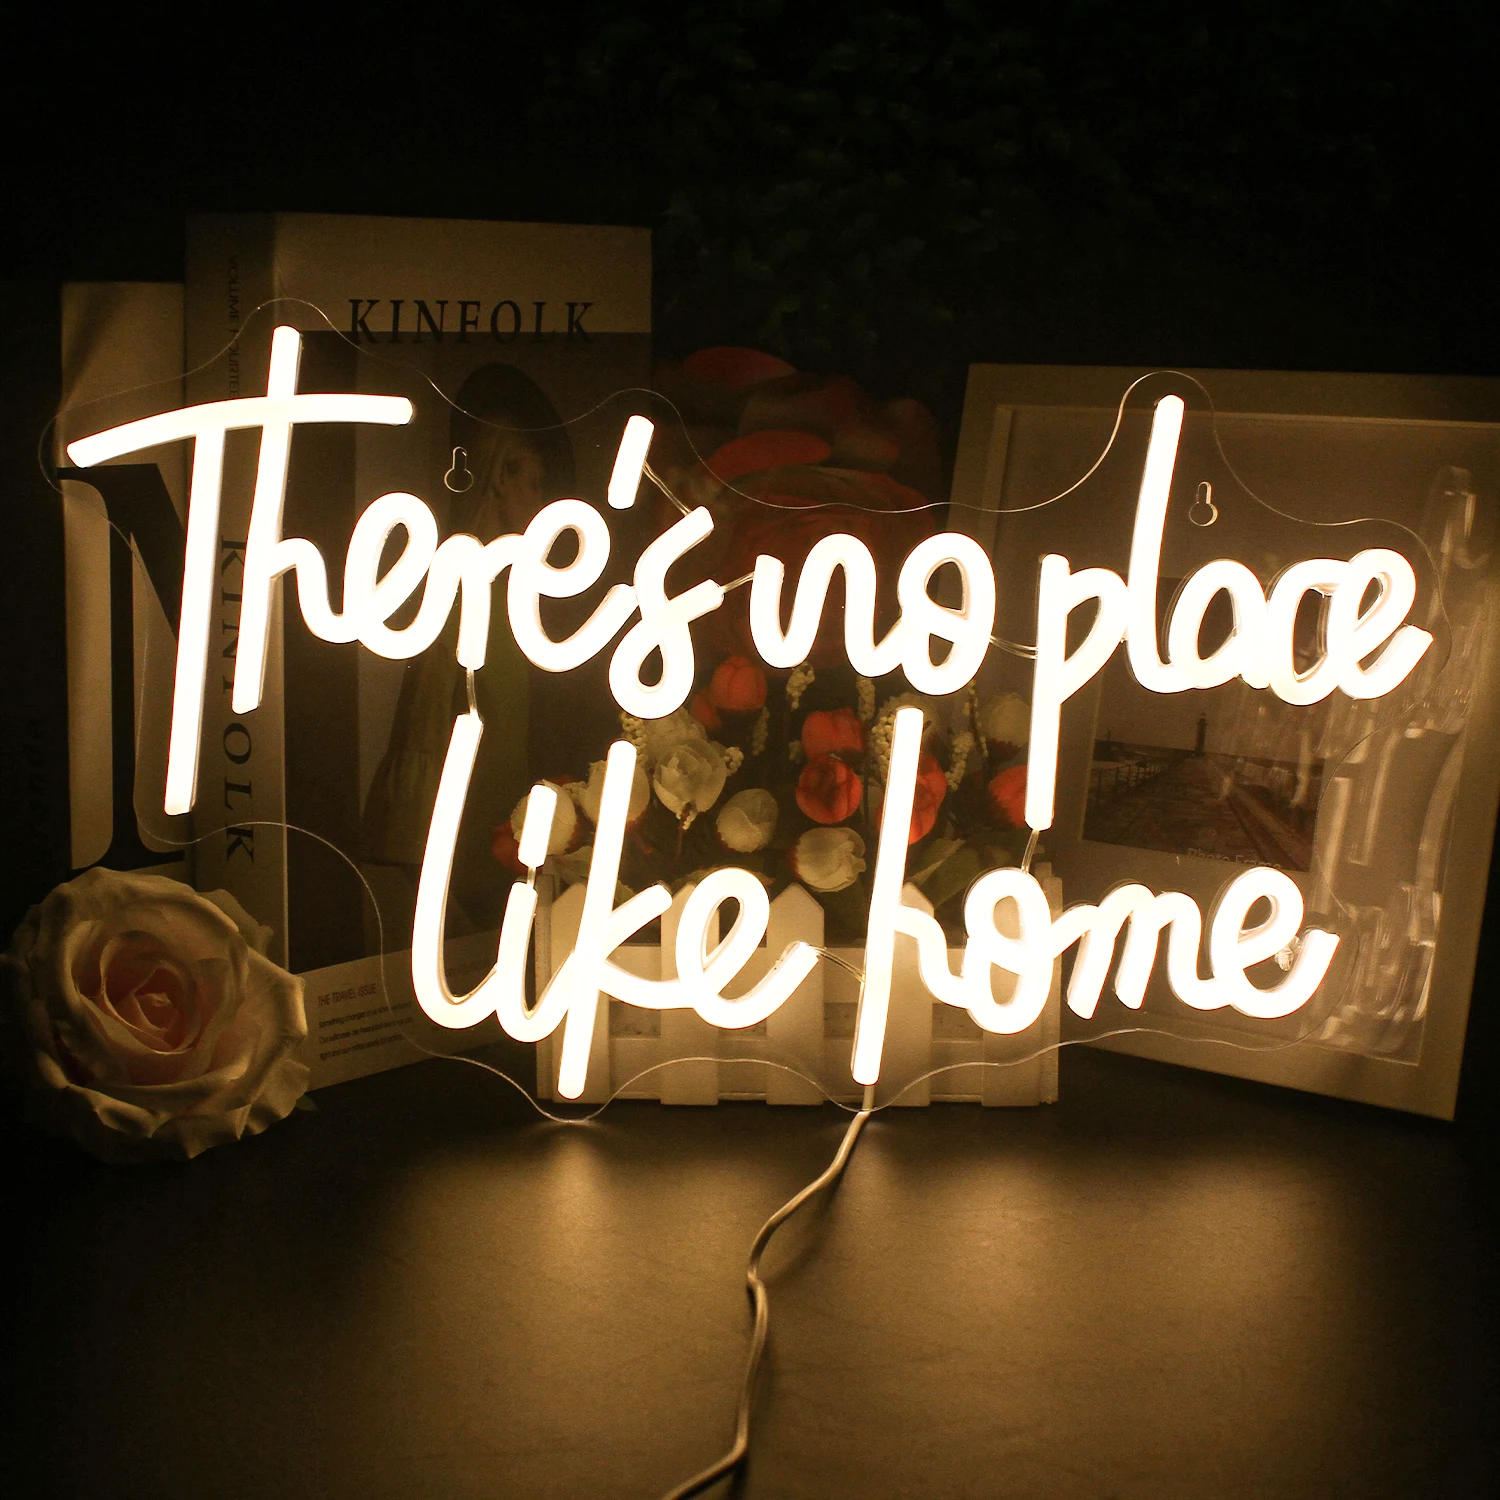 

There's No Place Like Home LED Neon Sign Light Home Art Bedroom Hotel Kid Room Wall Decor Neon Light Acrylic House Party Neon